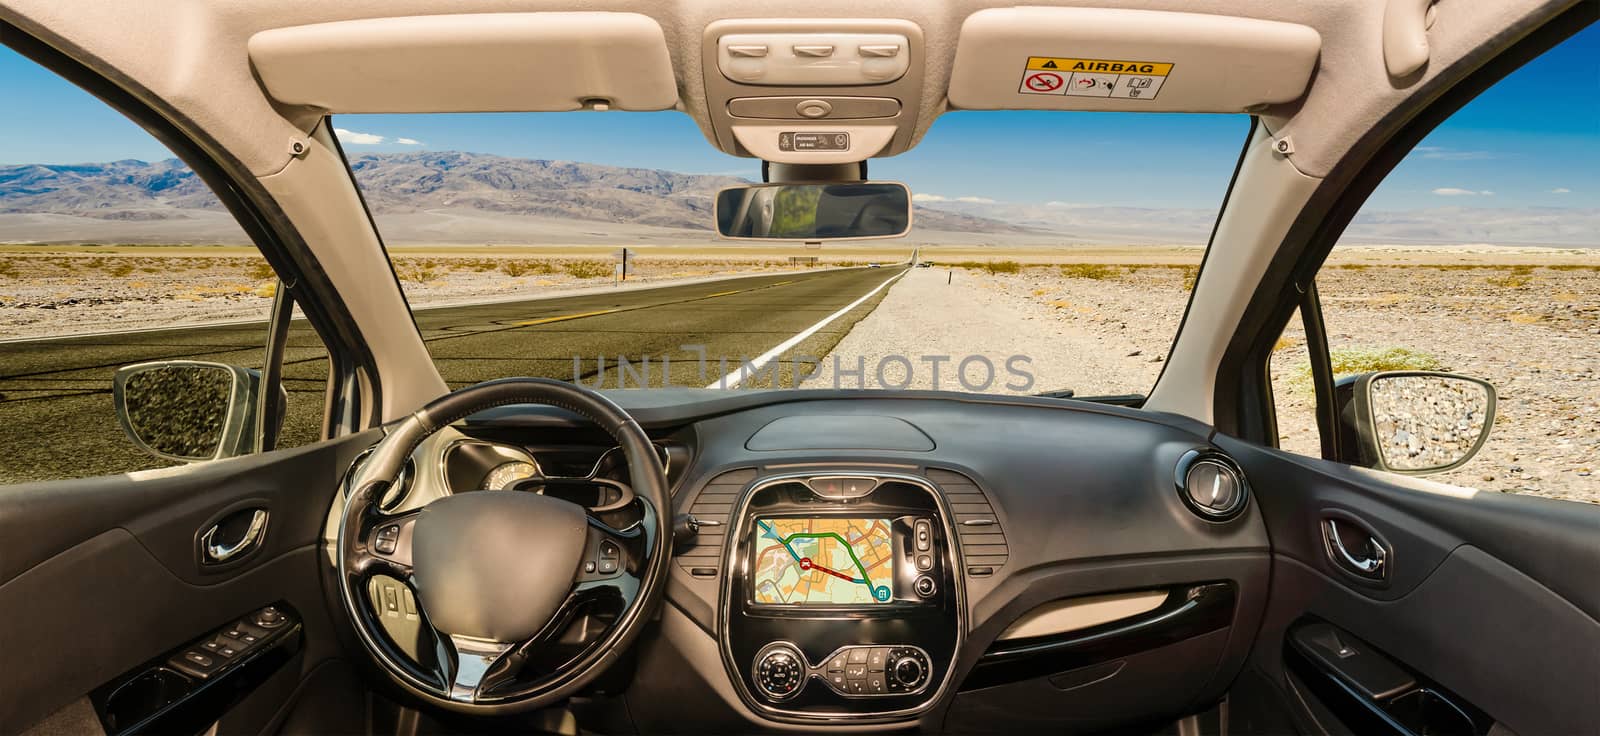 Looking through a car windshield with view over a hot desert road in Death Valley National Park, California, USA